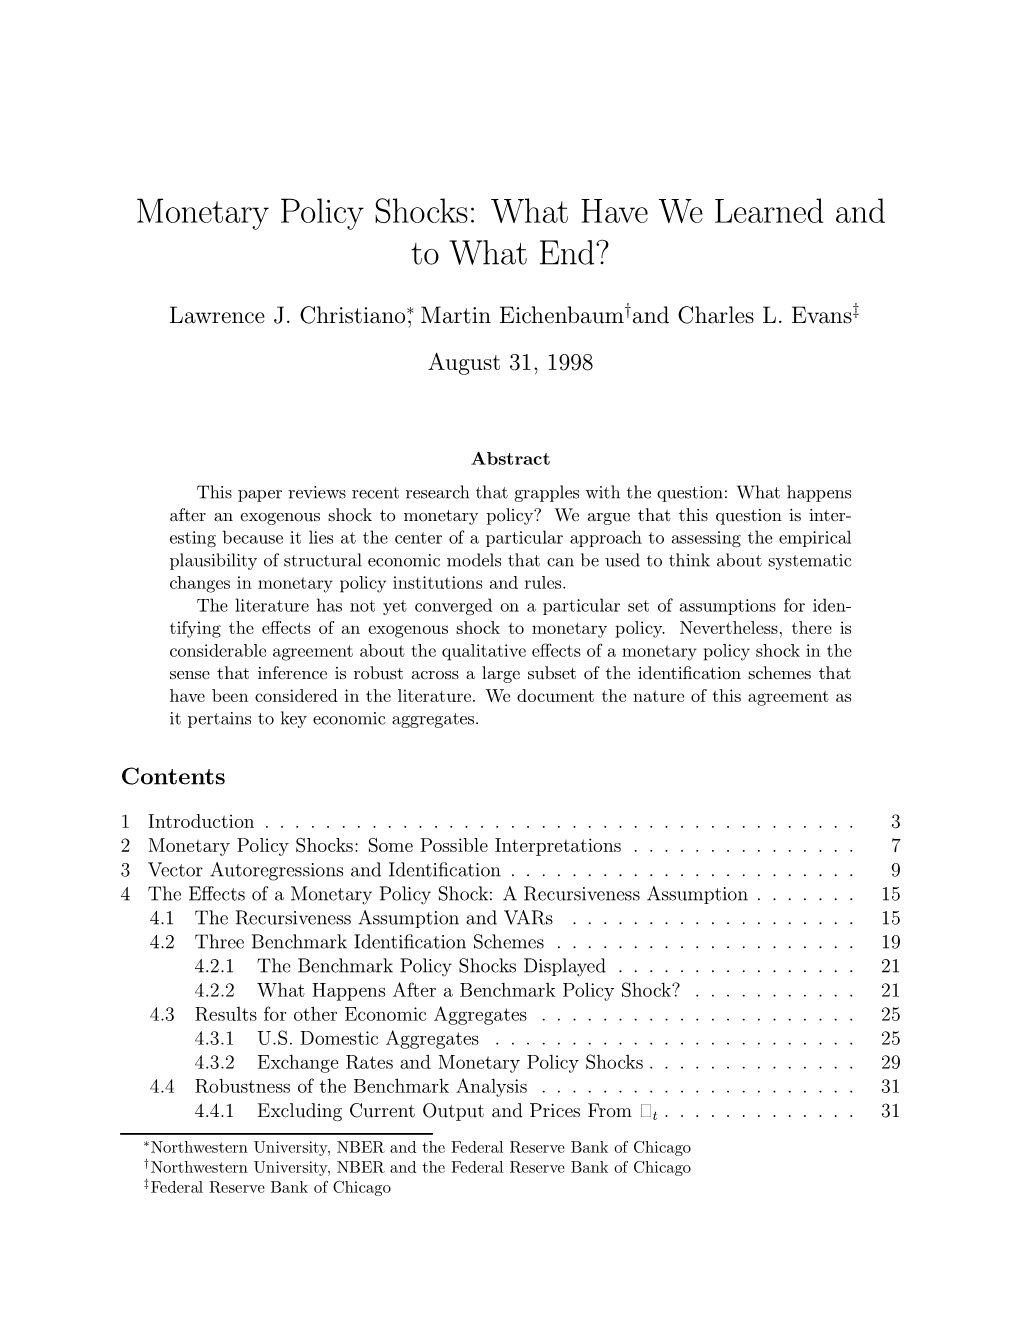 Monetary Policy Shocks: What Have We Learned and to What End?